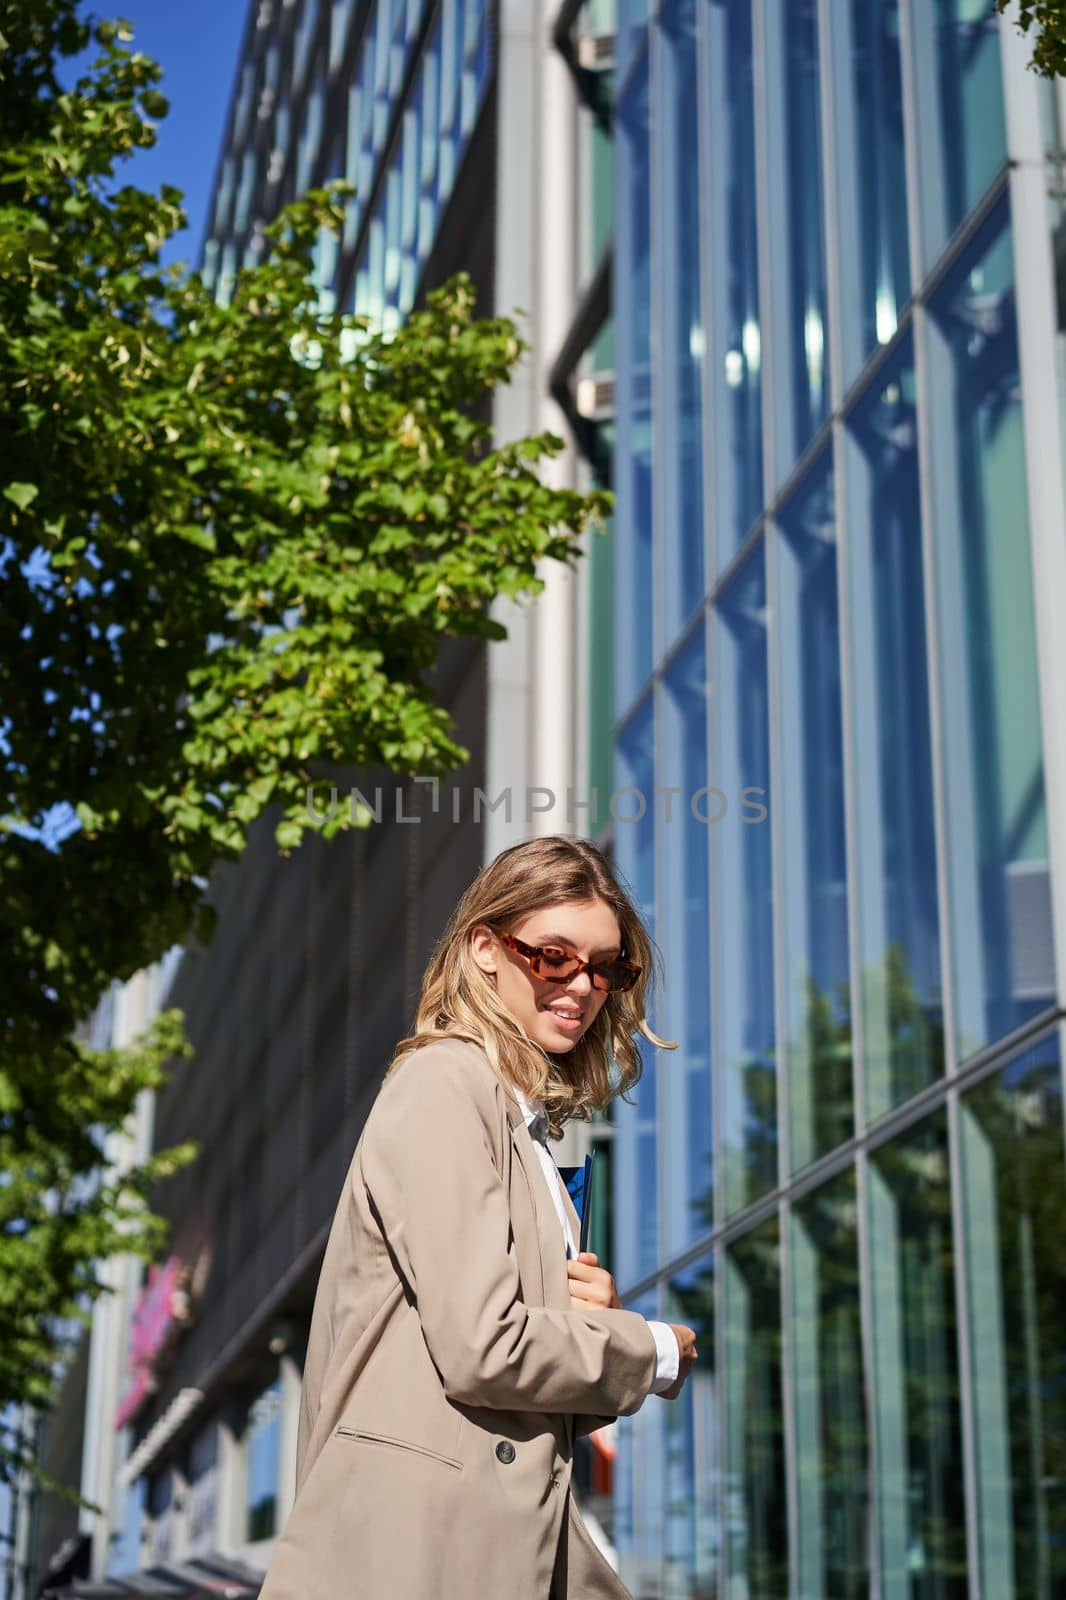 Portrait of confident saleswoman going to work, wearing sunglasses and suit. Businesswoman on her way to office, posing outdoors.